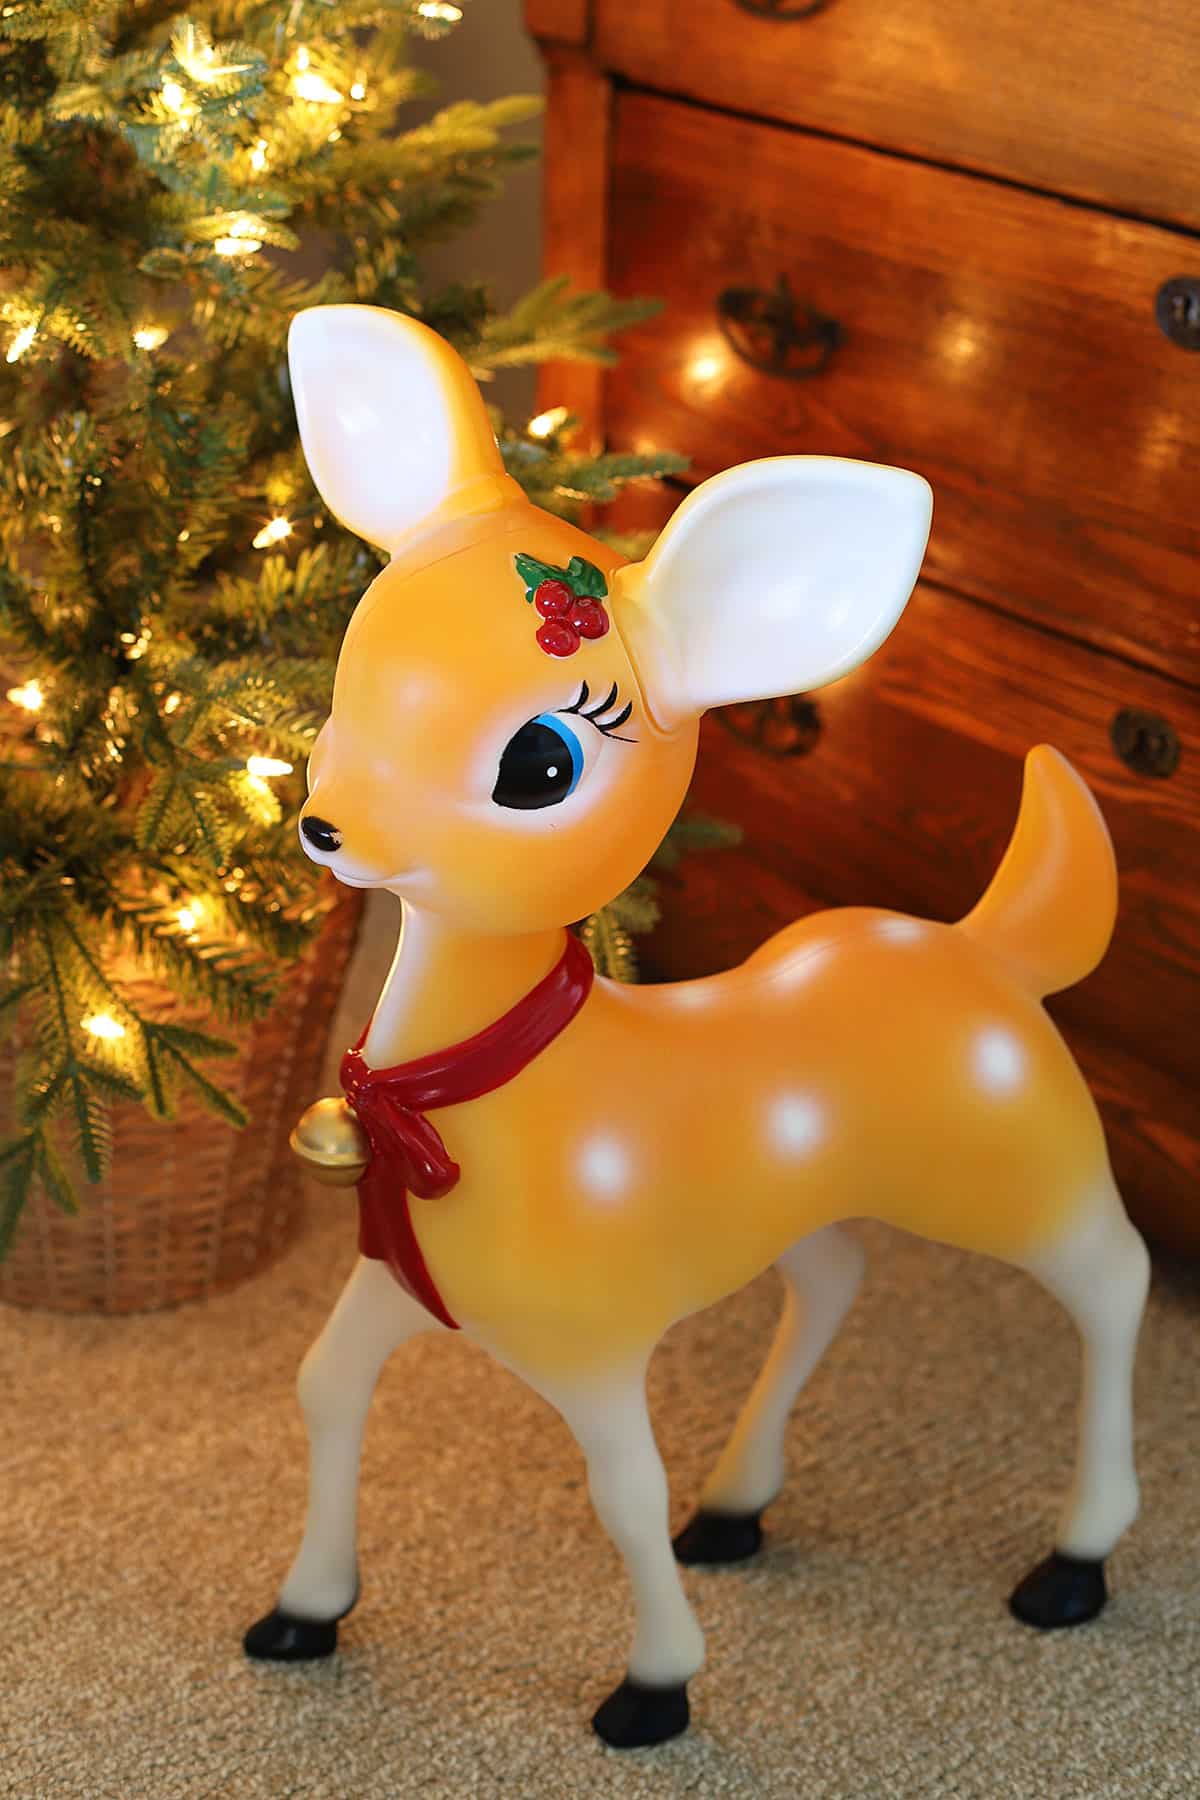 Retro reindeer blow mold for Christmas decor. The reindeer has a red bow on its neck and large eyelashes similar to Clarice from the Rudolph The Red Nosed Reindeer movie.